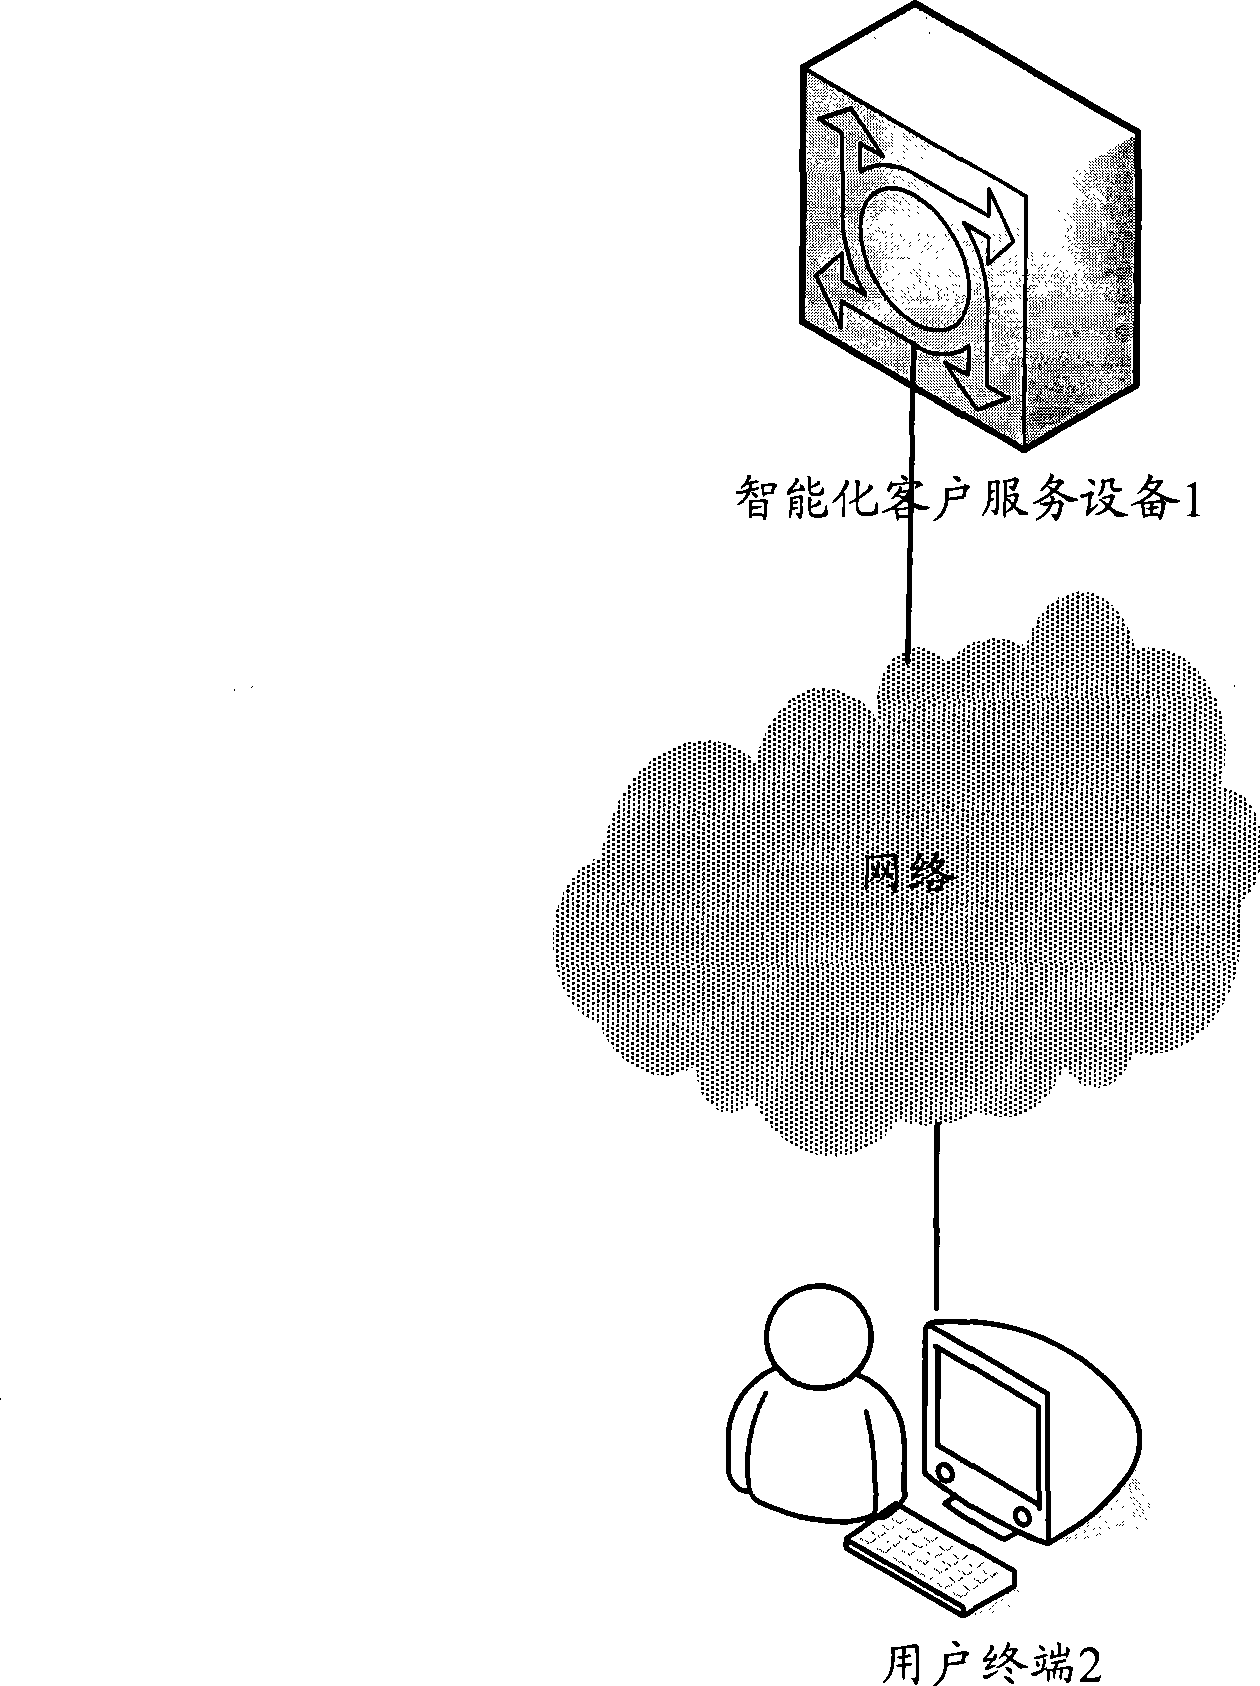 Method and equipment for implementing automatic customer service through human-machine interaction technology